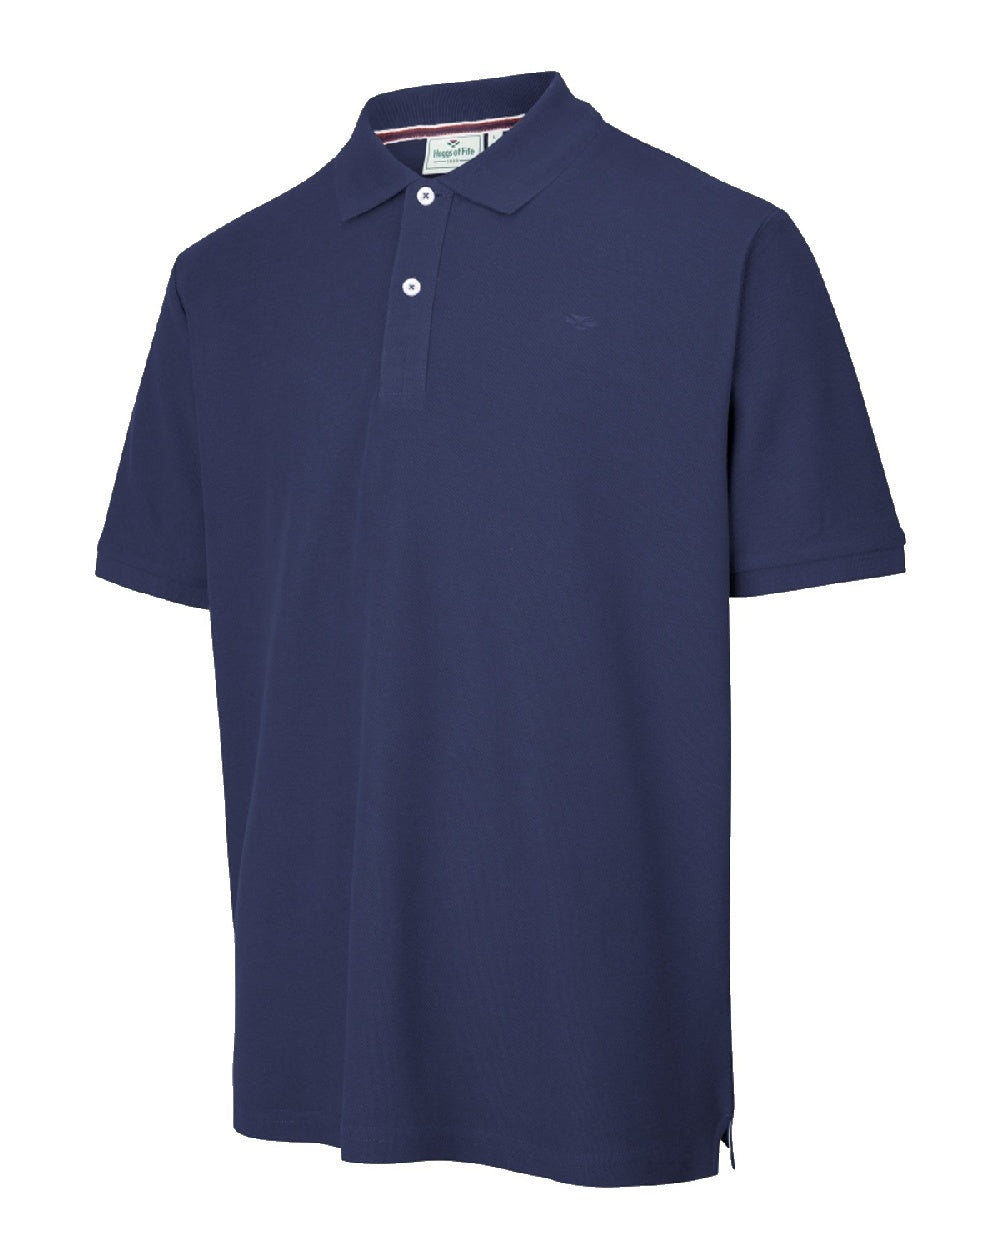 Navy coloured Hoggs of Fife Largs Pique Polo Shirt on white background 